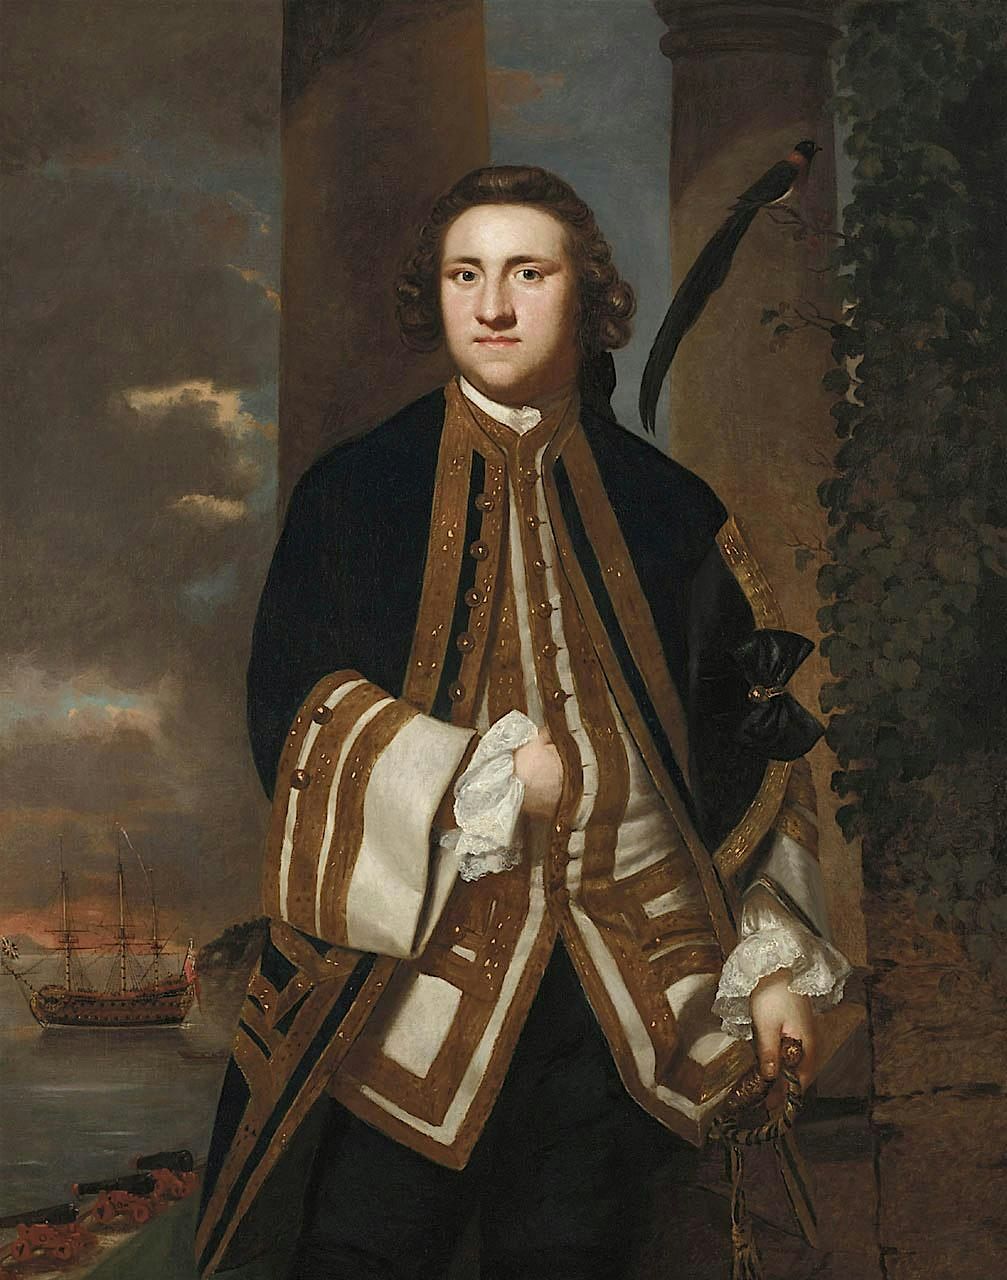 Naval Gazing: Portraiture and the Royal Navy